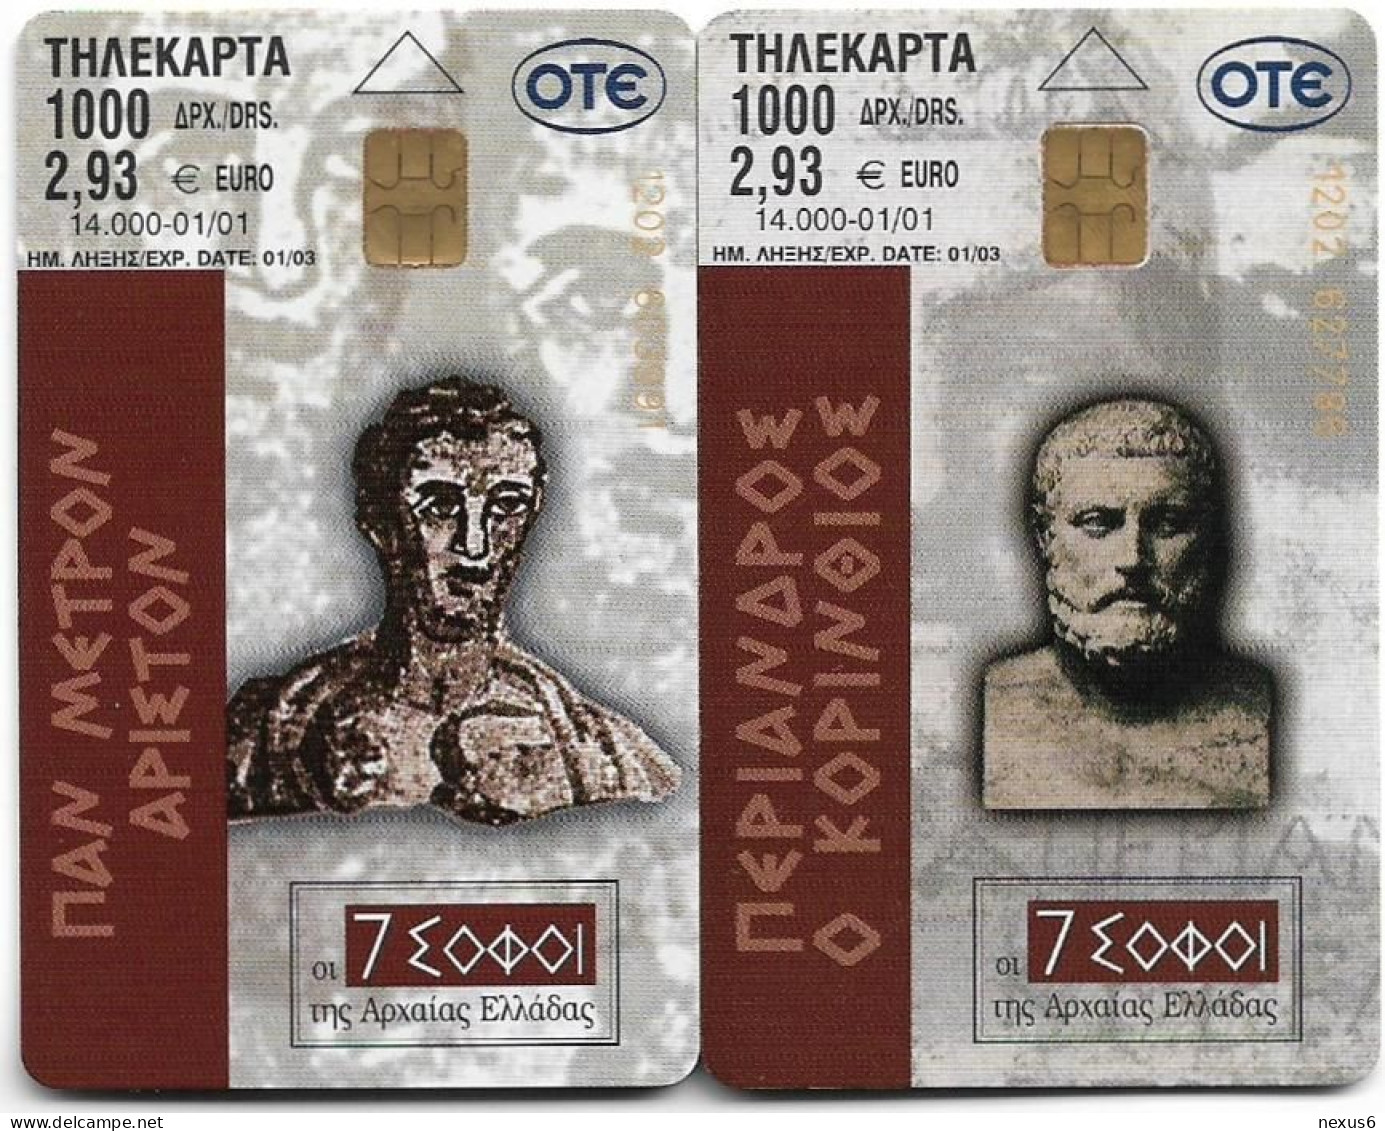 Greece - 17th Collectibles Set - 7 Wise Men - Periandros & Kleovoulos (S033 - S034) 01.2001, 14.000ex, Mint - Griechenland